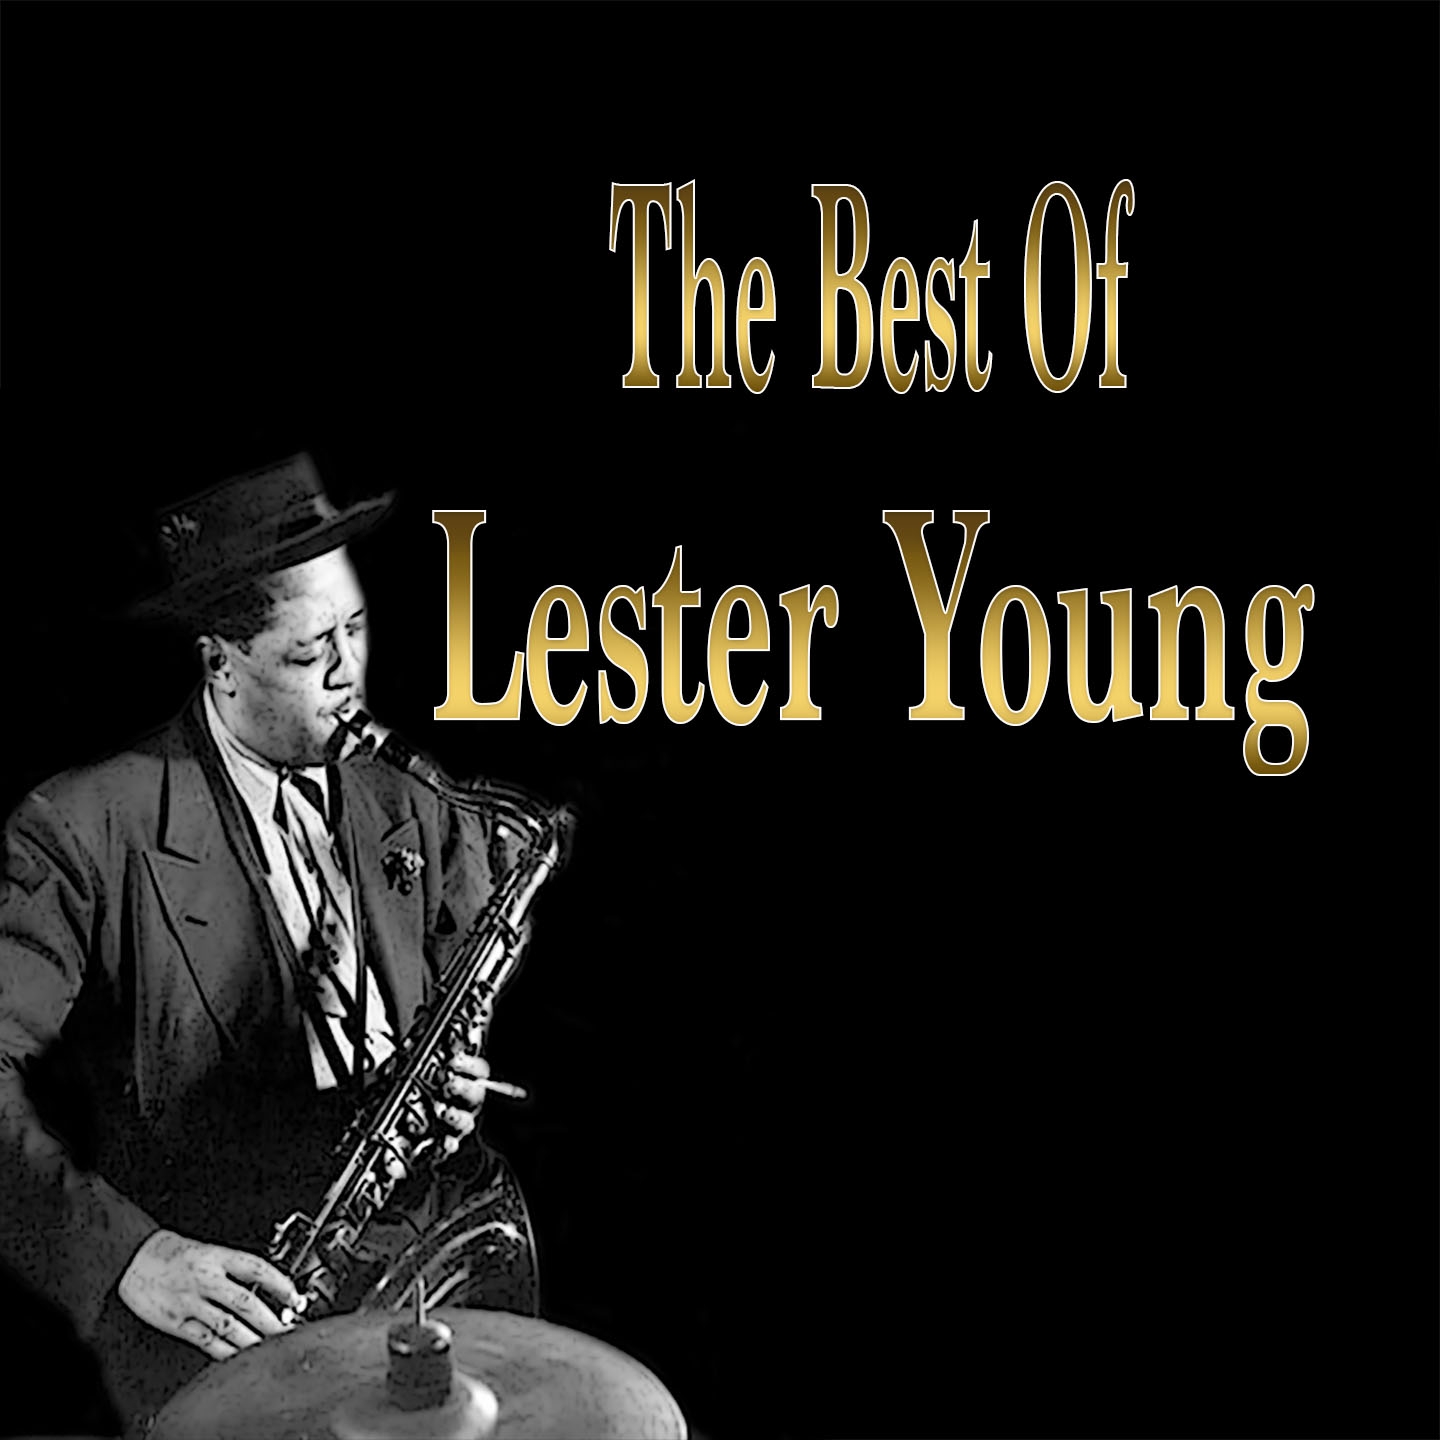 2 - The Best of Lester Young - Just You Just Me, I Never Knew, And 20 Other Hits